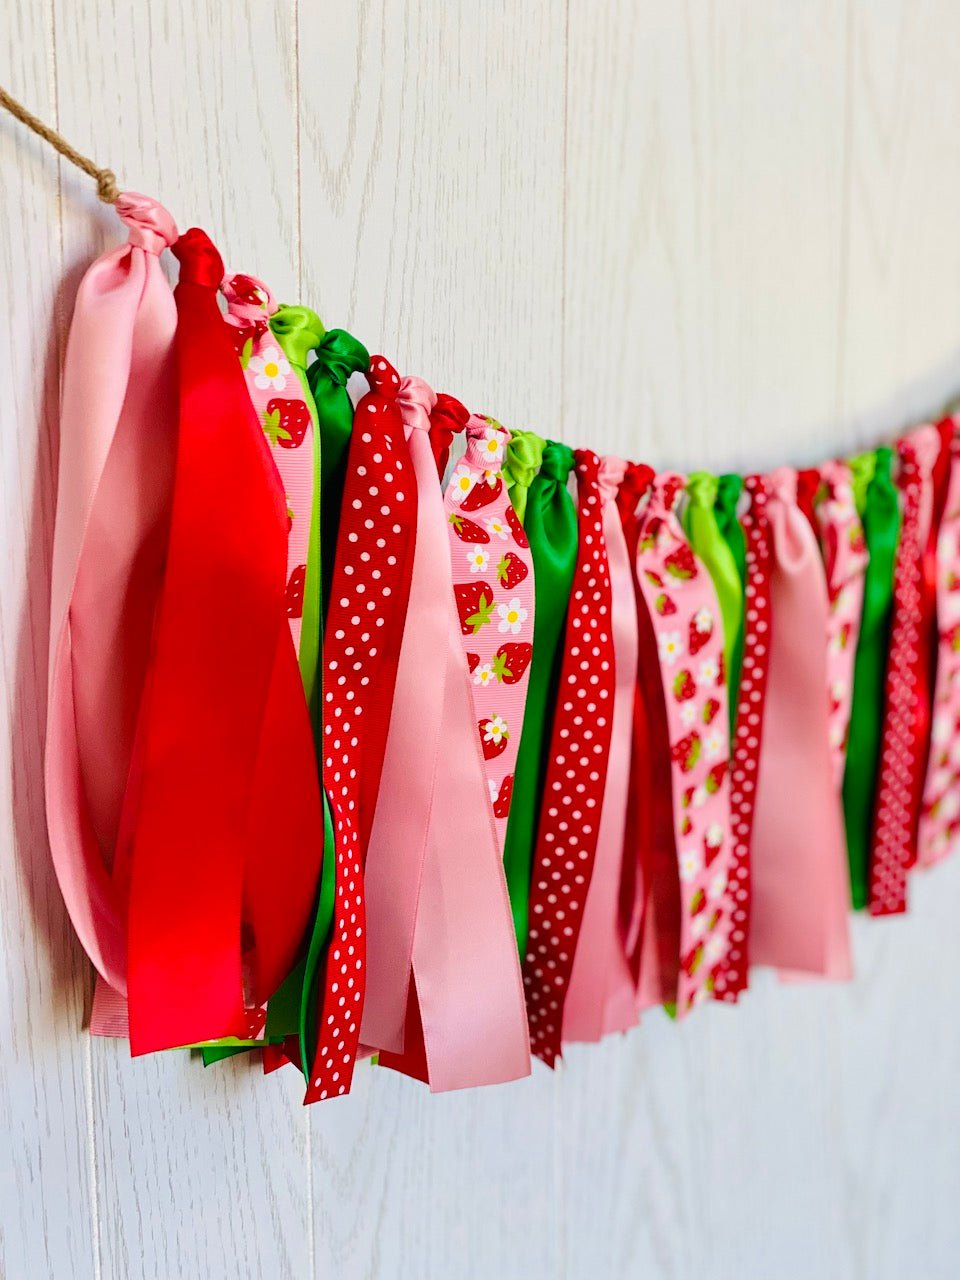 Strawberry Ribbon Bunting - FREE Shipping - The Party Teacher